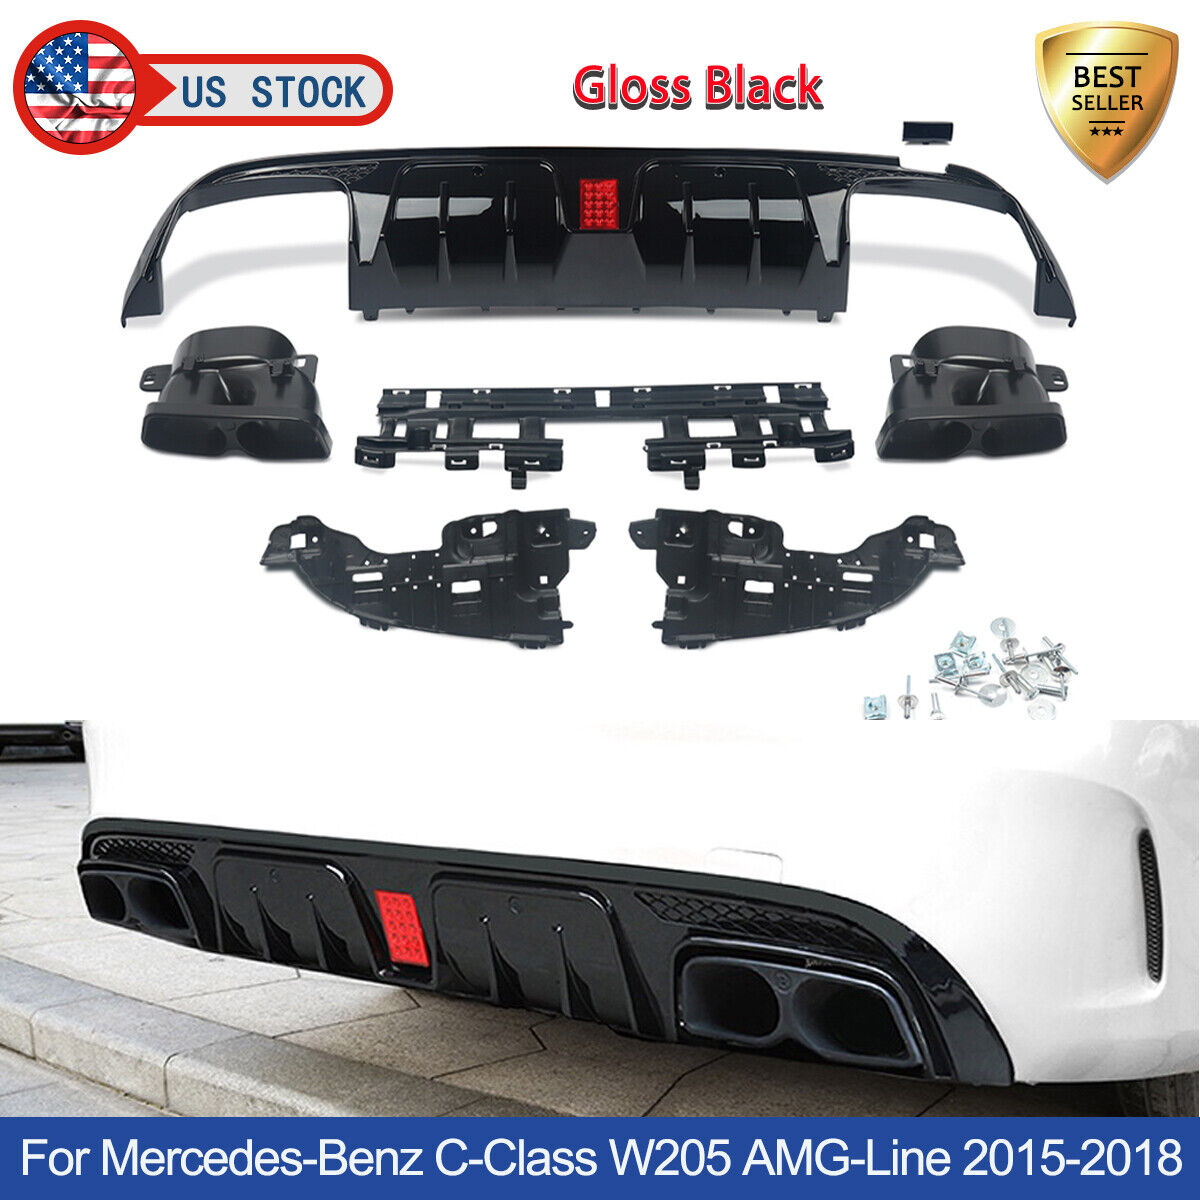 Rear Diffuser Lip W/Exhaust Tips For Mercedes-Benz C-Class W205 C300 C63 C43 AMG